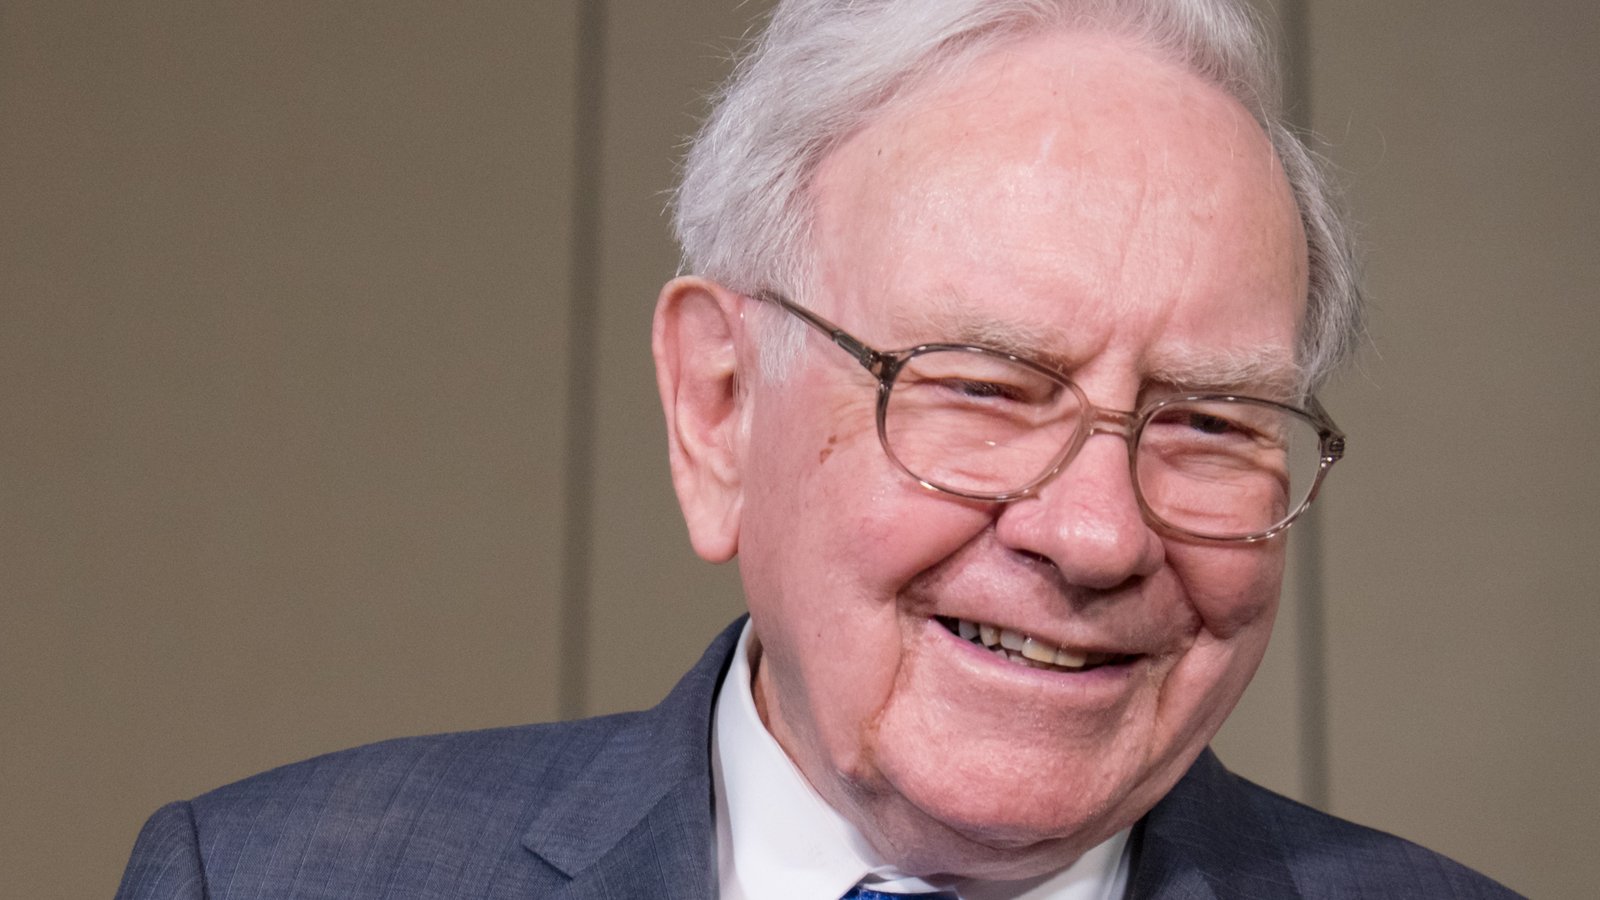 Warren Buffett Bargains: 3 Stocks With Price Tags Too Good to Ignore